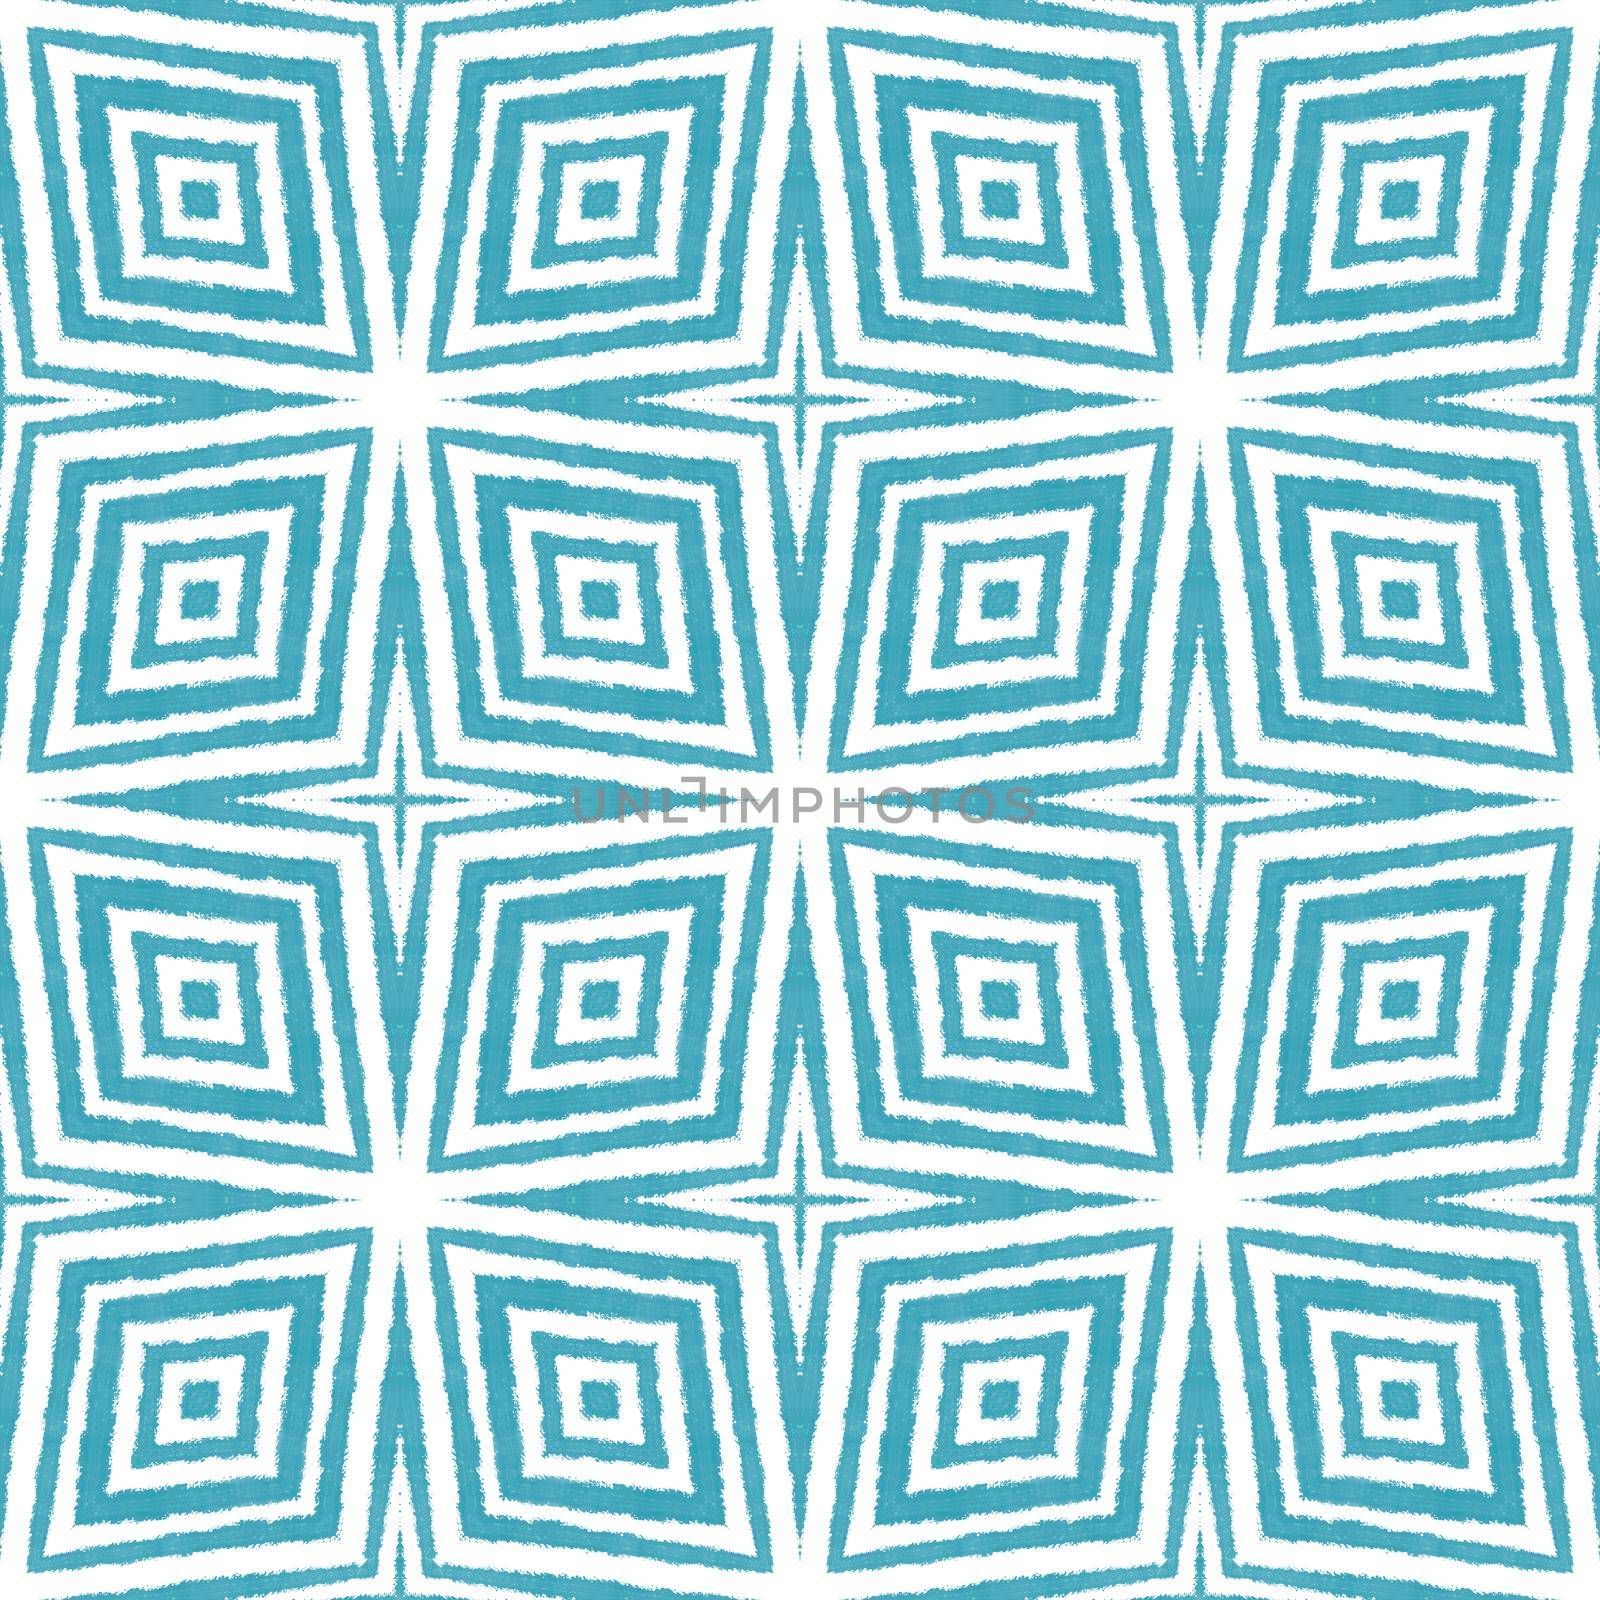 Textured stripes pattern. Turquoise symmetrical by beginagain